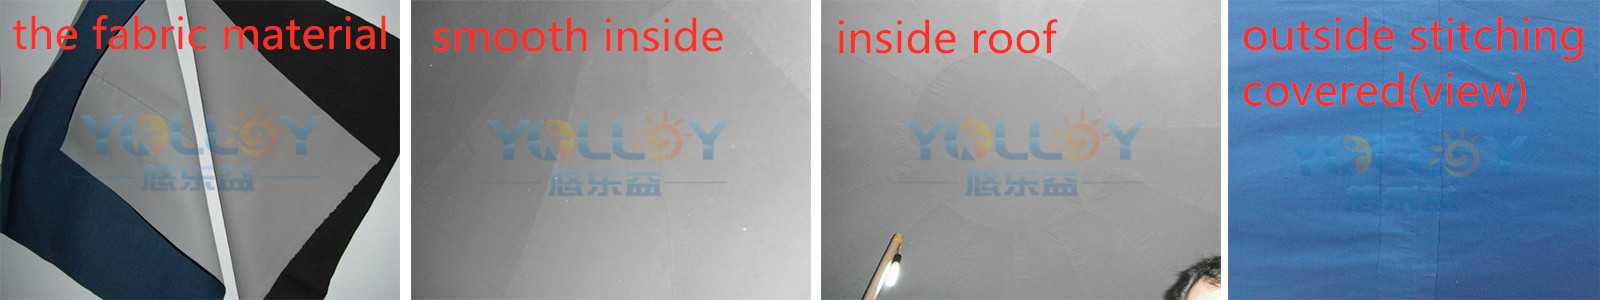 material and inside images of portable projection inflatable dome tent